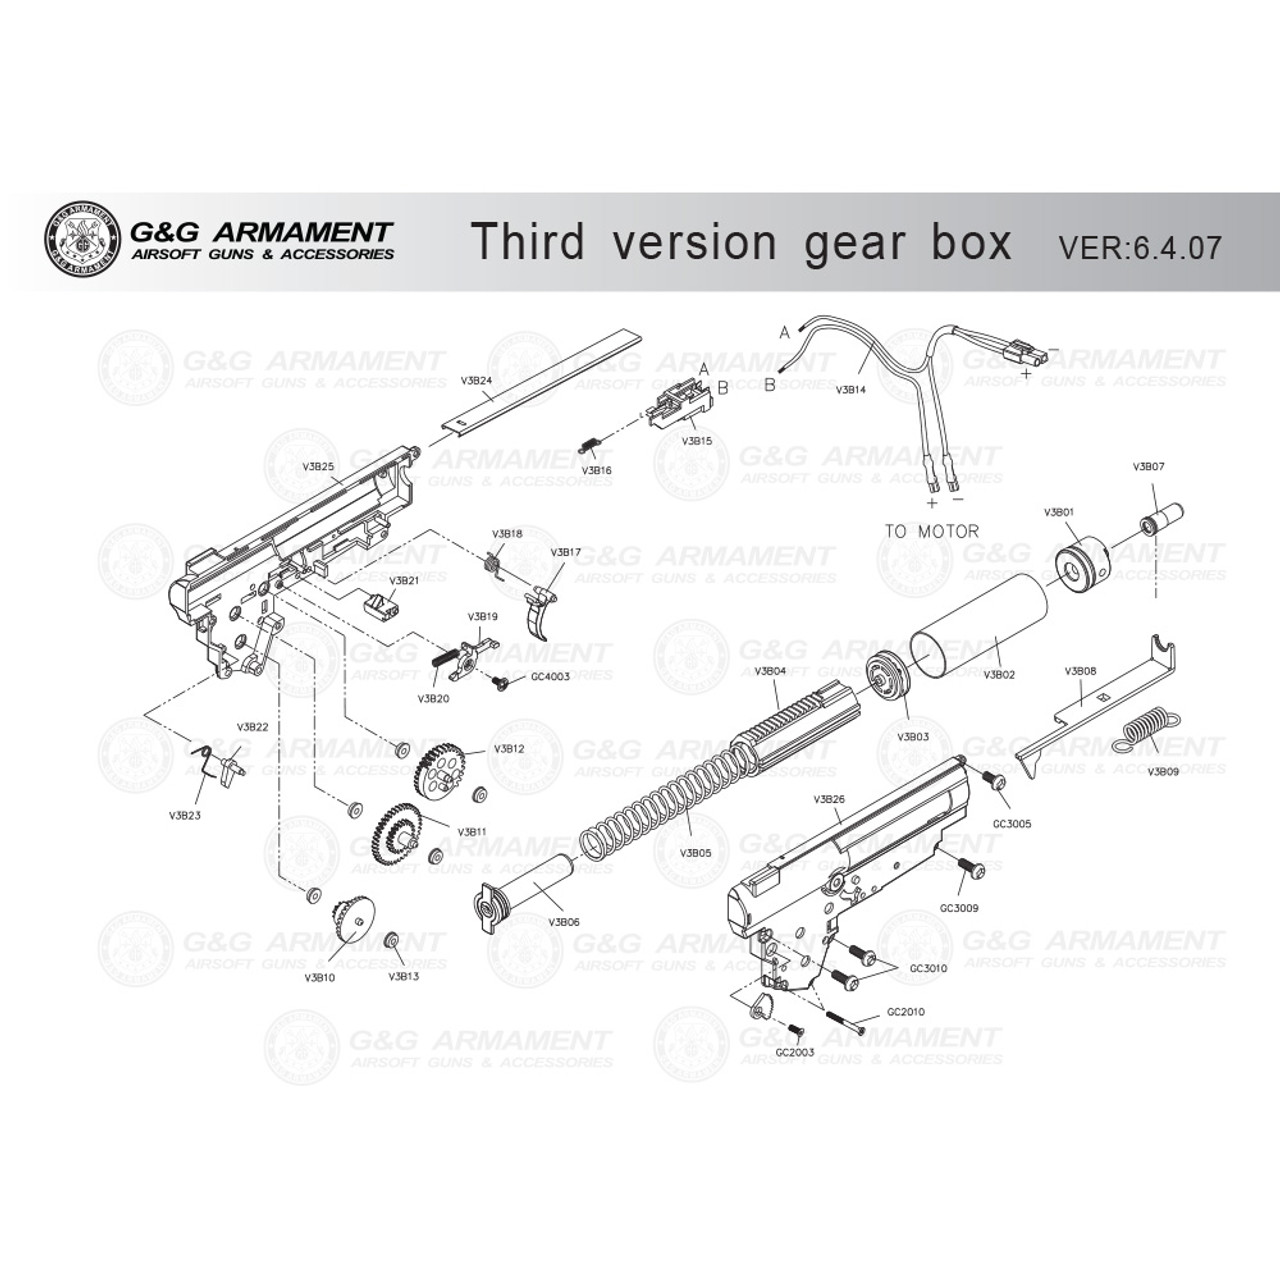 G&G AIRSOFT THIRD VERSION GEARBOX DIAGRAM low price of $0